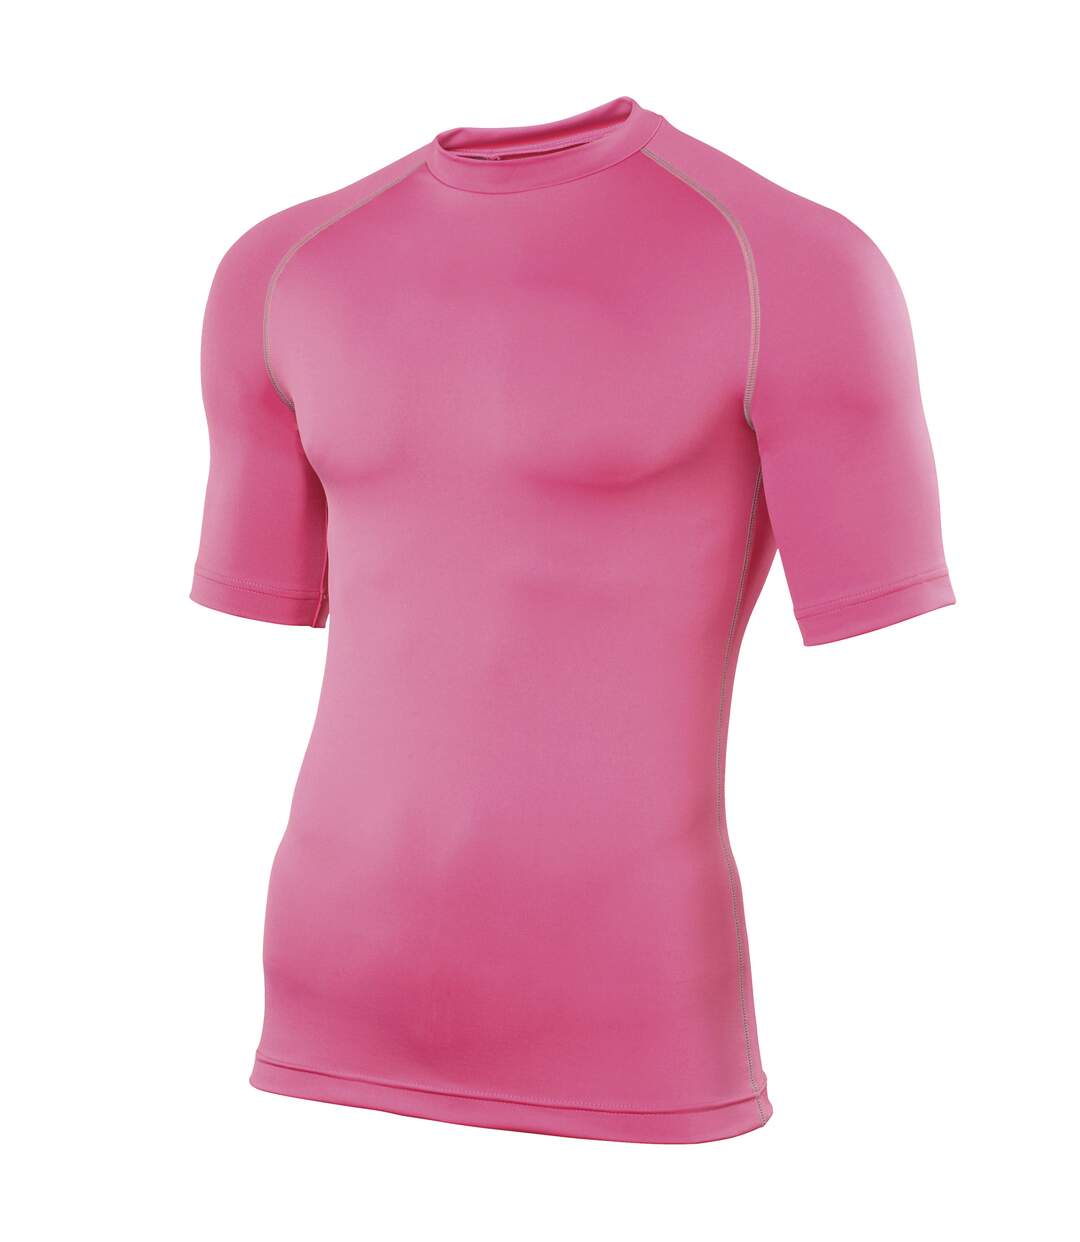 Rhino - Base layer sport à manches courtes - Homme (Rose) - UTRW1277